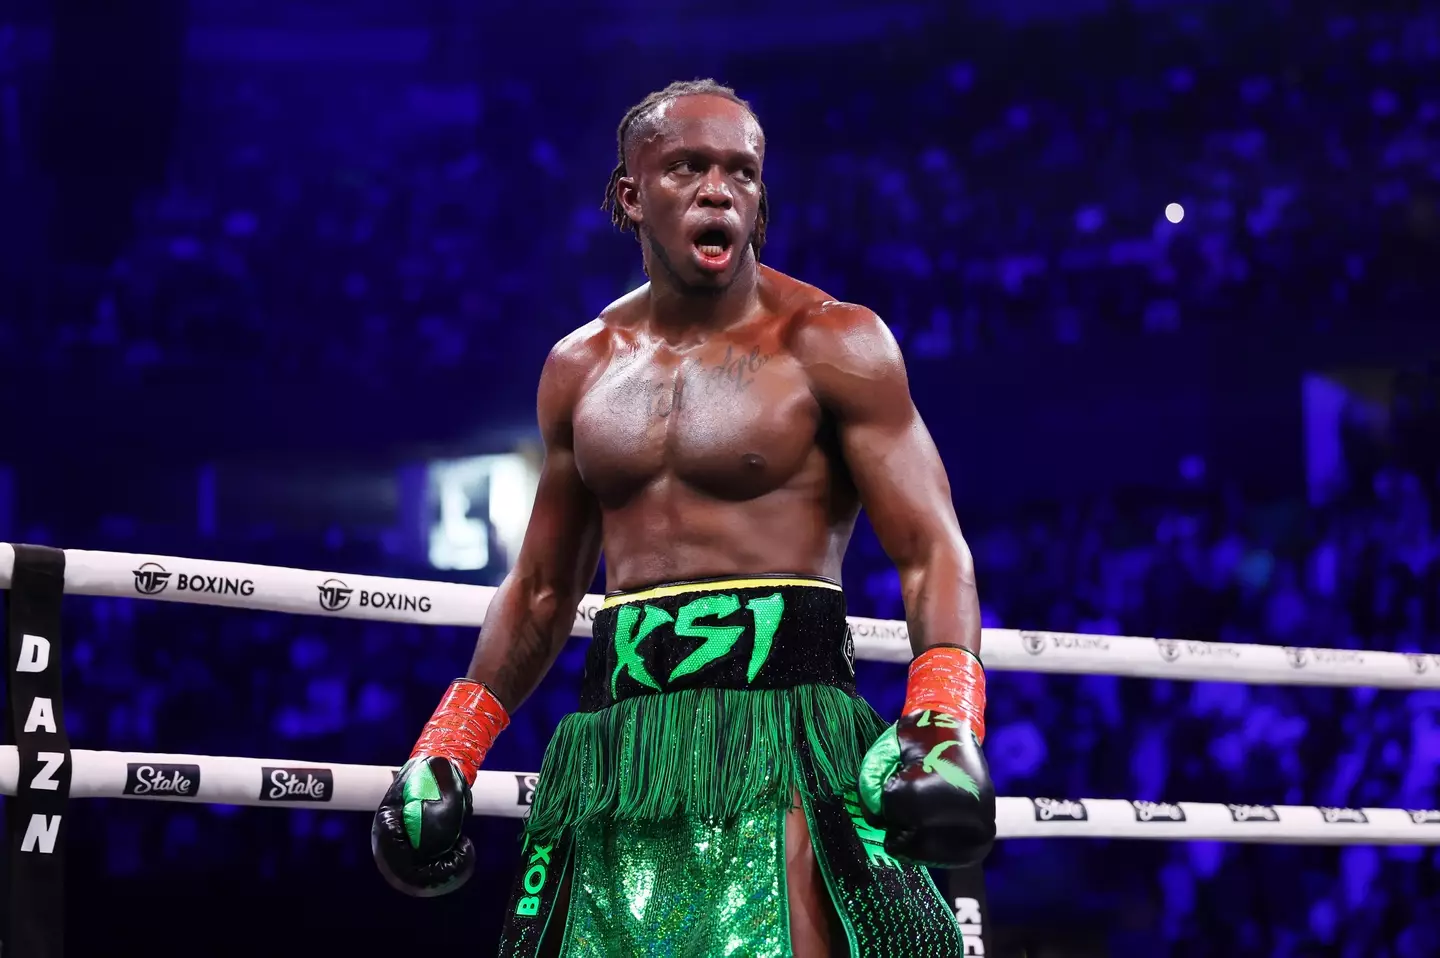 KSI's team later appealed the result, claiming the YouTuber's loss was a 'robbery.'